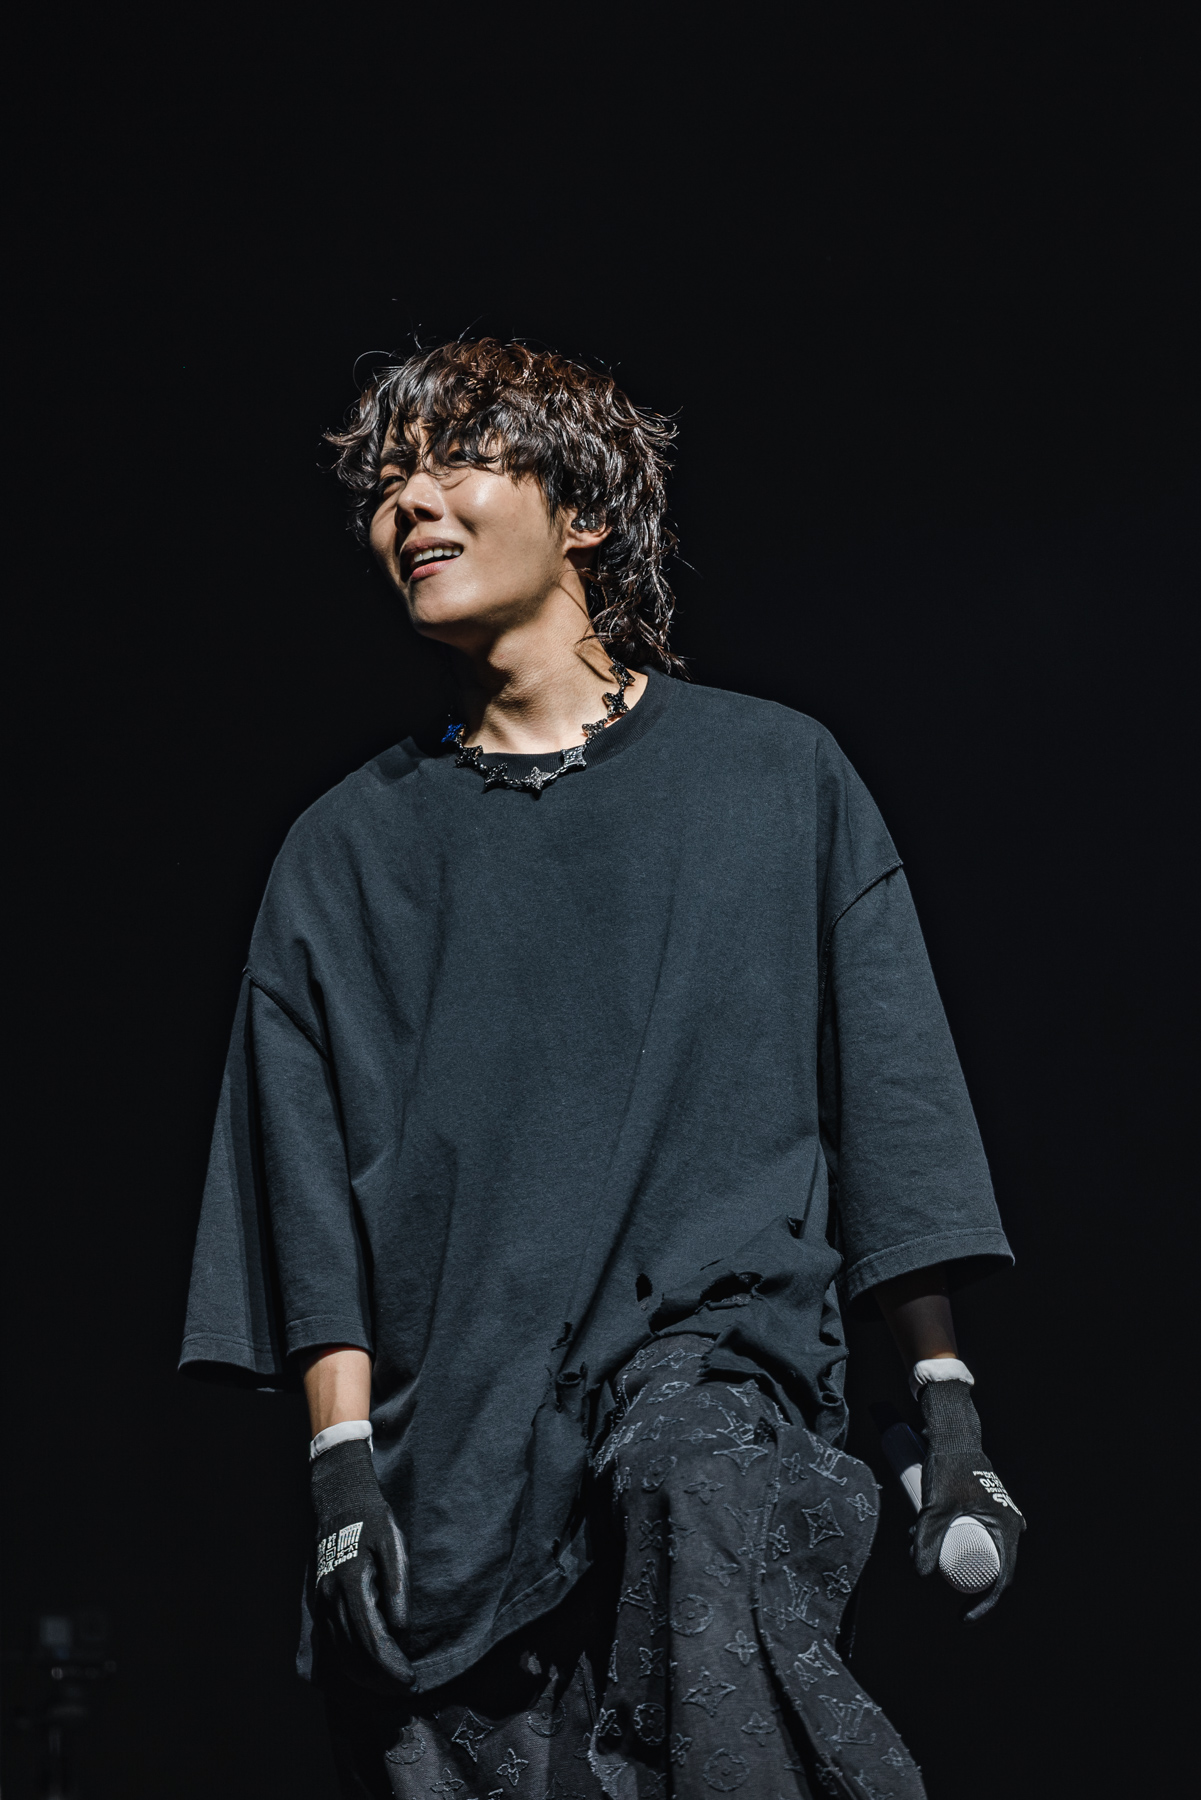 BTS' J-Hope Debuted New Grunge Style While Performing at Lollapalooza